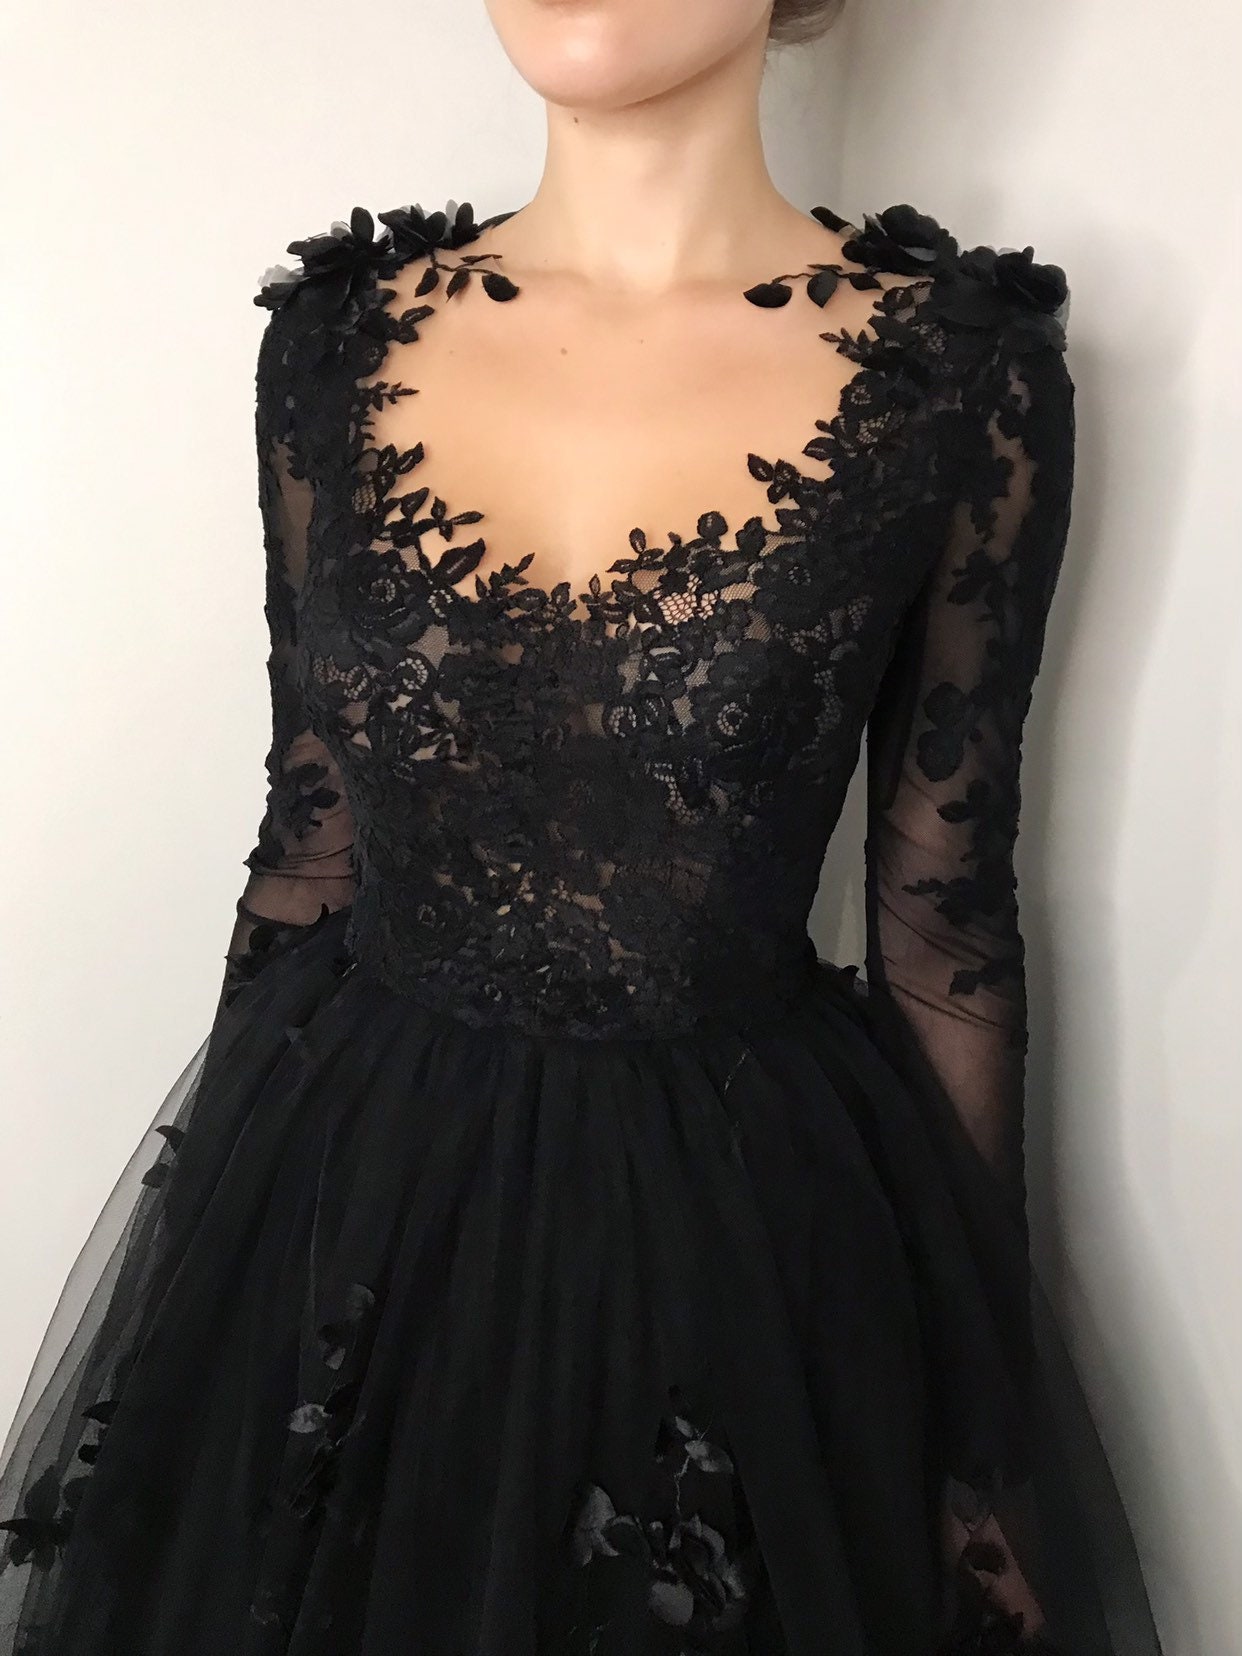 Black Floral Gothic Wedding Dress Black Flower Tulle Lace pic picture